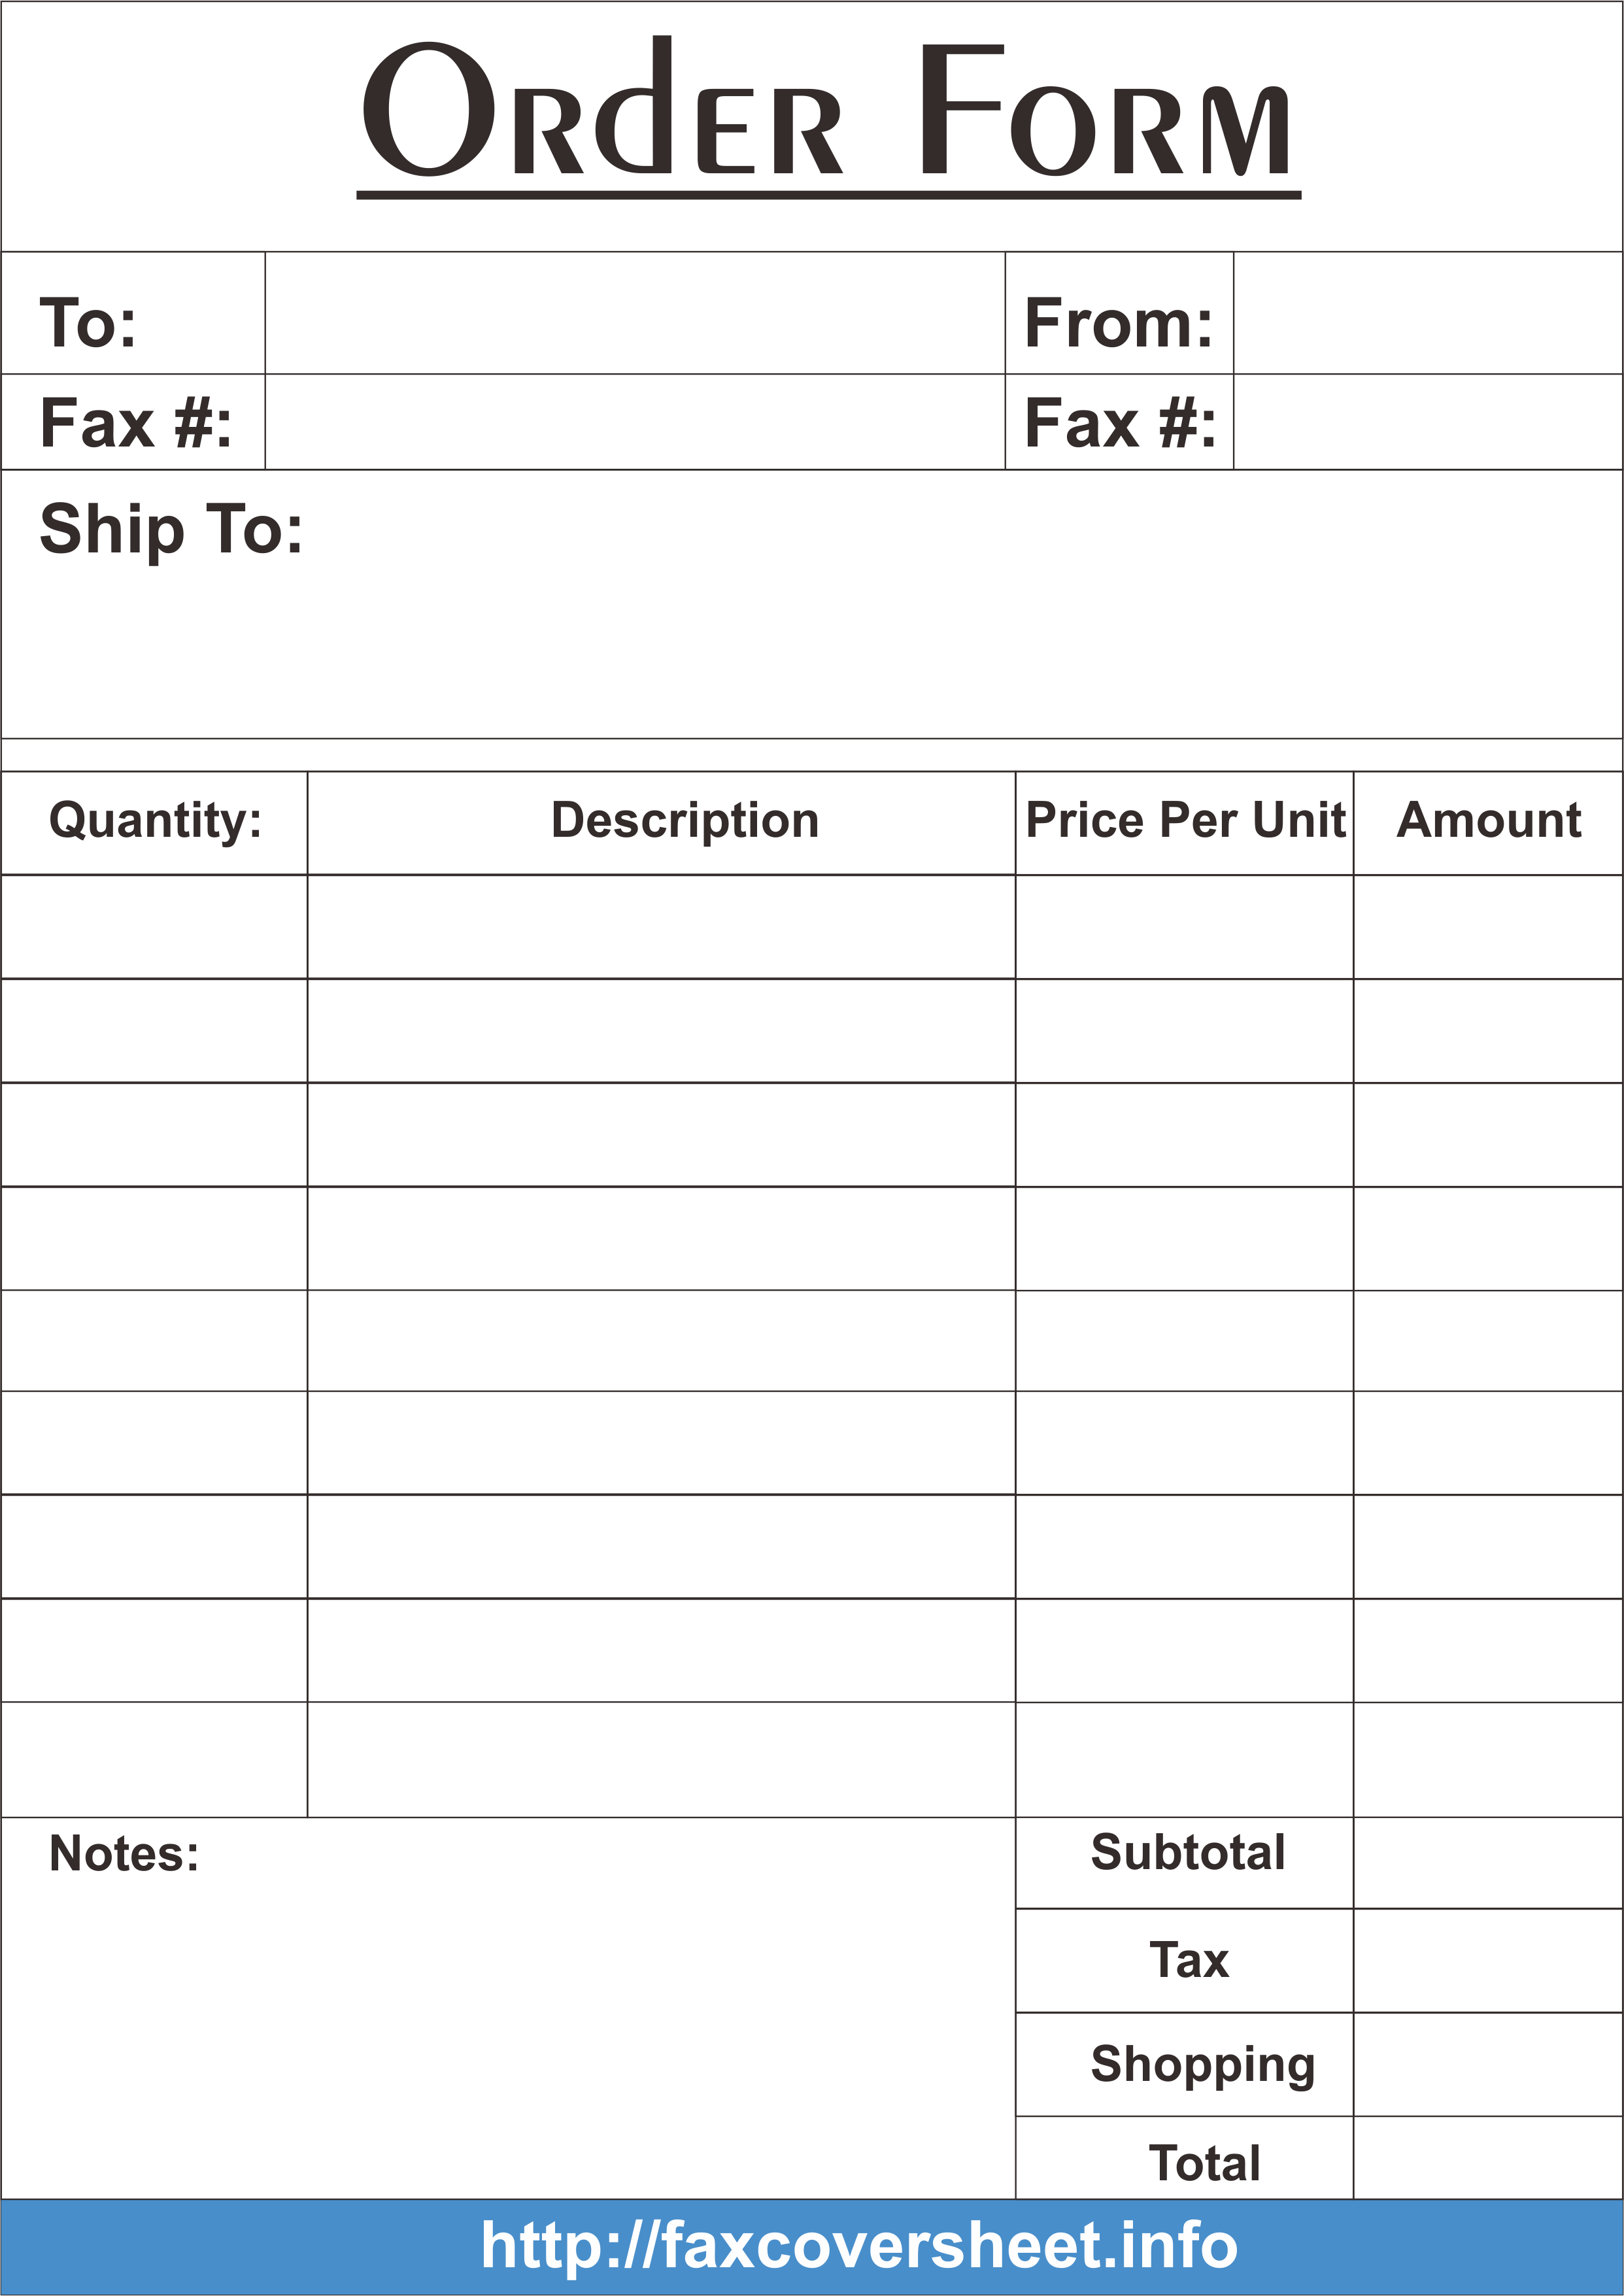 order-form-free-fax-cover-sheet-template